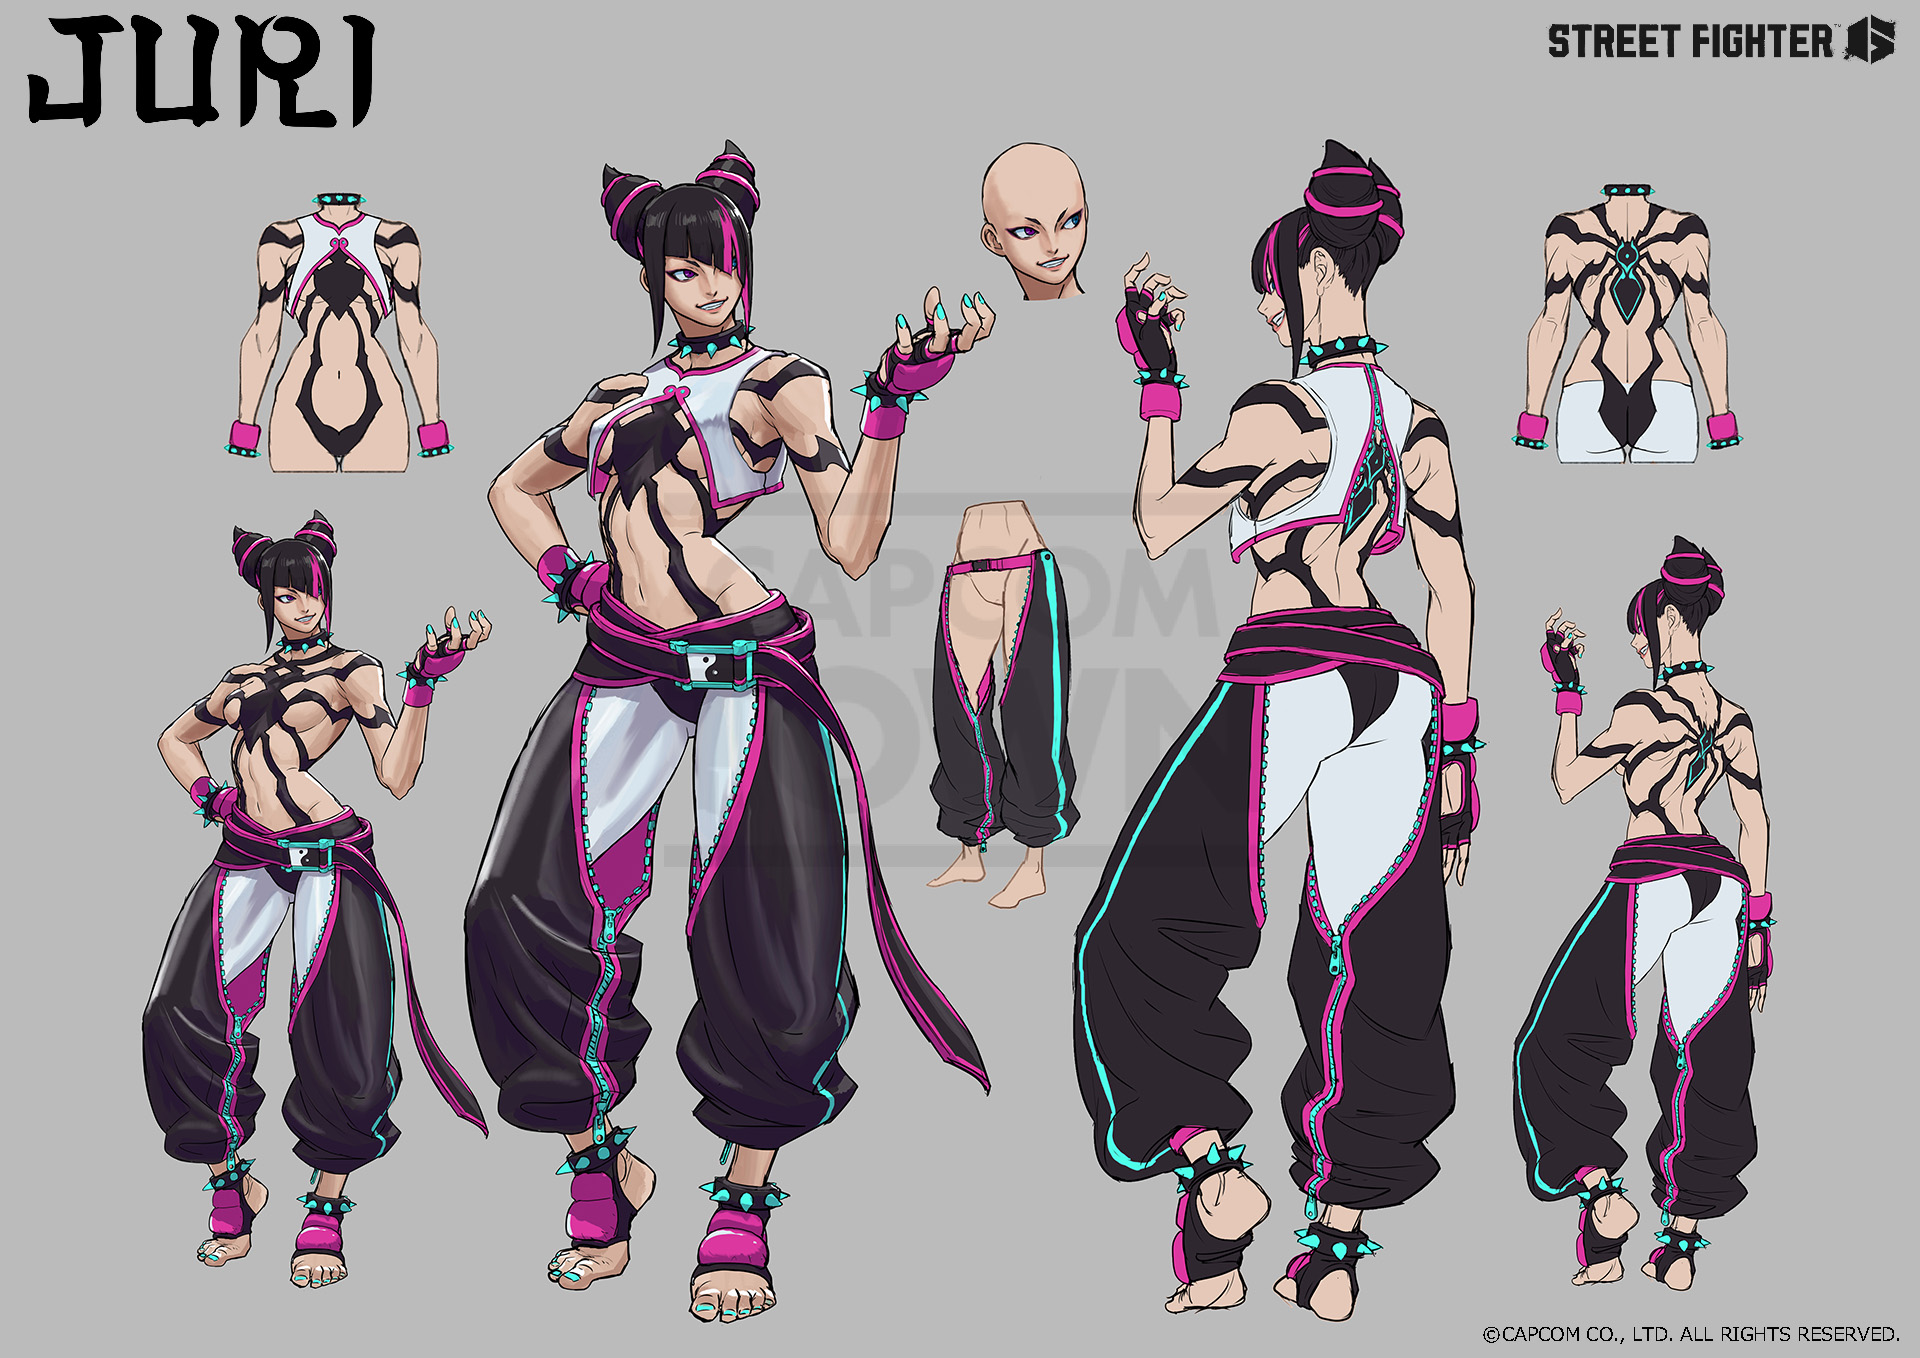 Street Fighter 6 Art Director Says Chun-Li Was One of the Hardest Redesigns